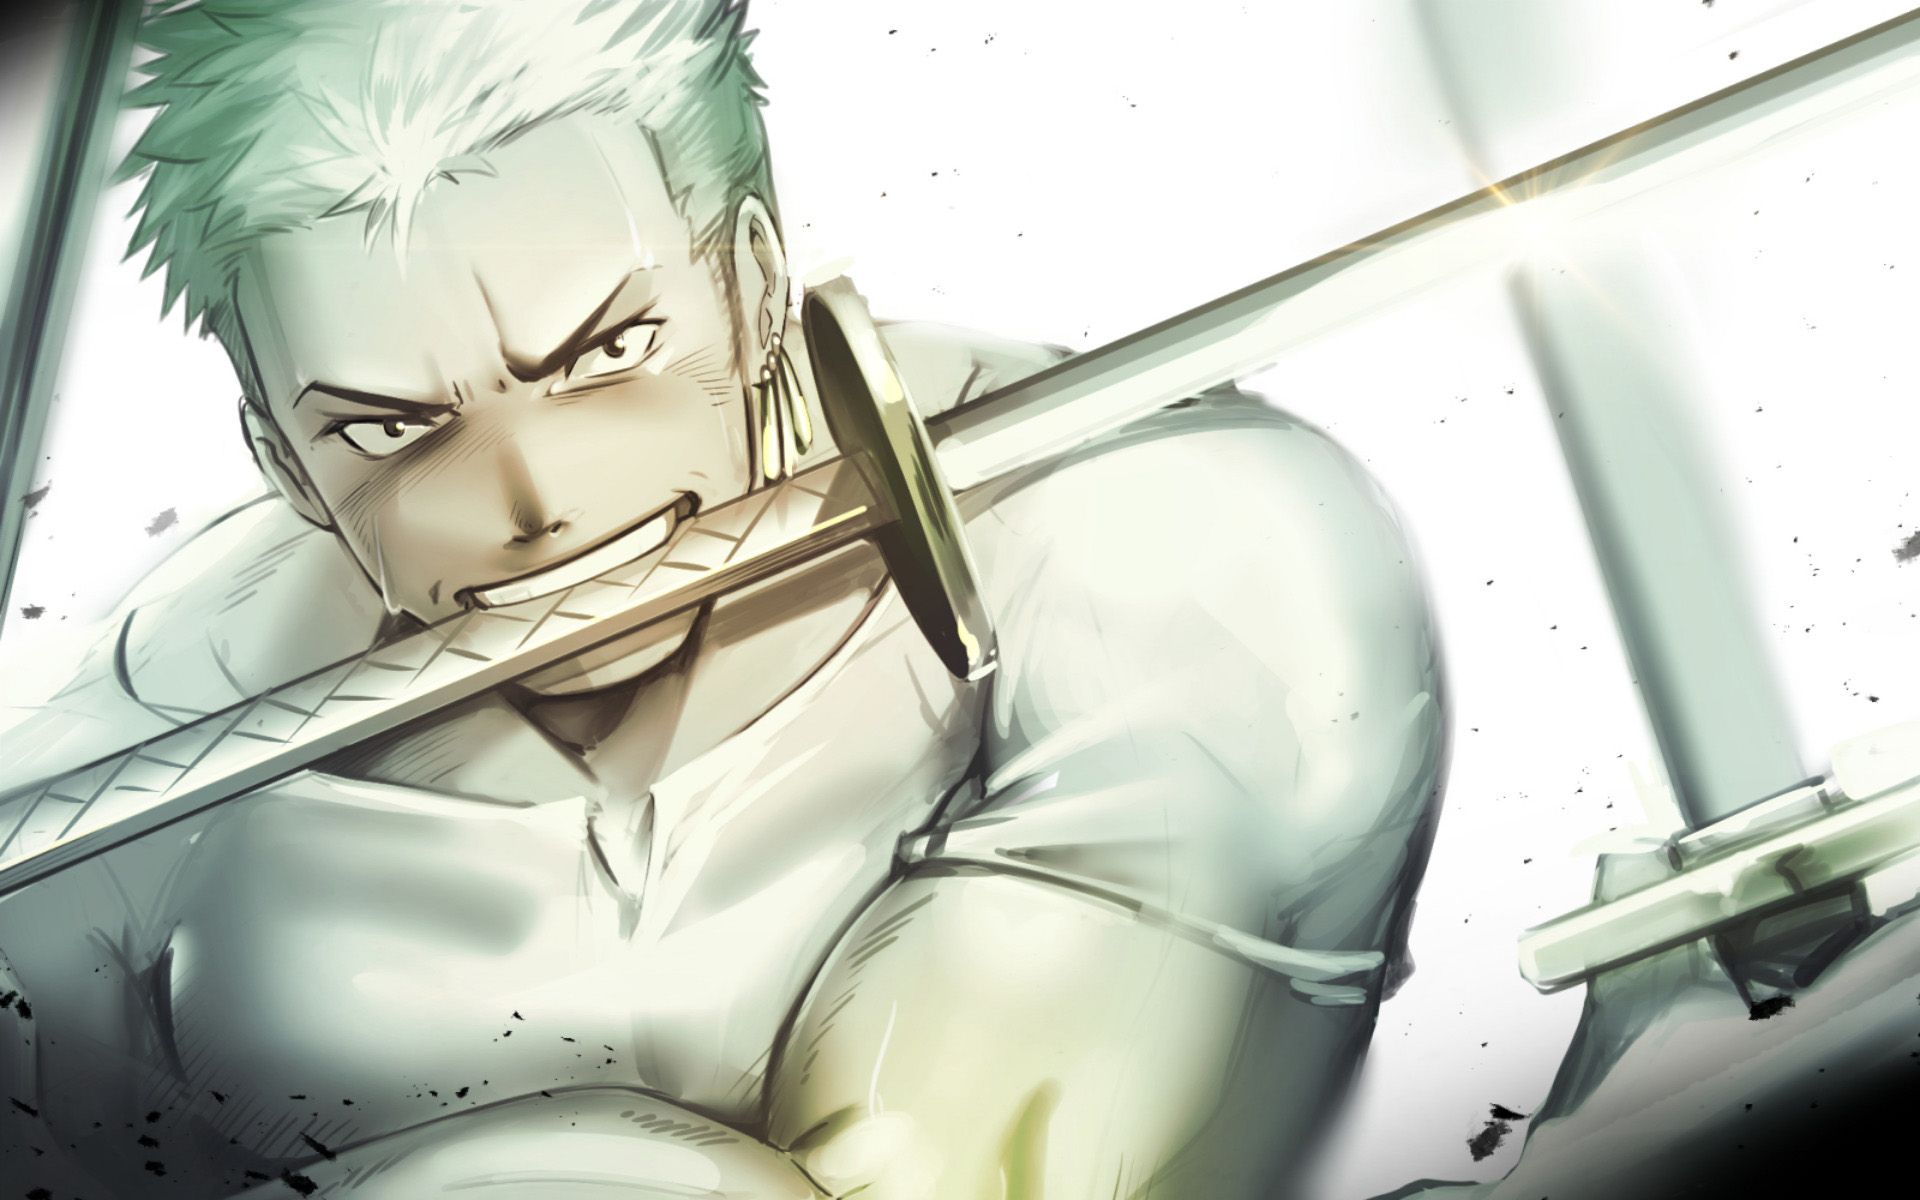 Download wallpaper Zoro Roronoa, One Piece, artwork, Pirate Hunter, manga, Straw Hat Pirates, One Piece characters for desktop with resolution 1920x1200. High Quality HD picture wallpaper